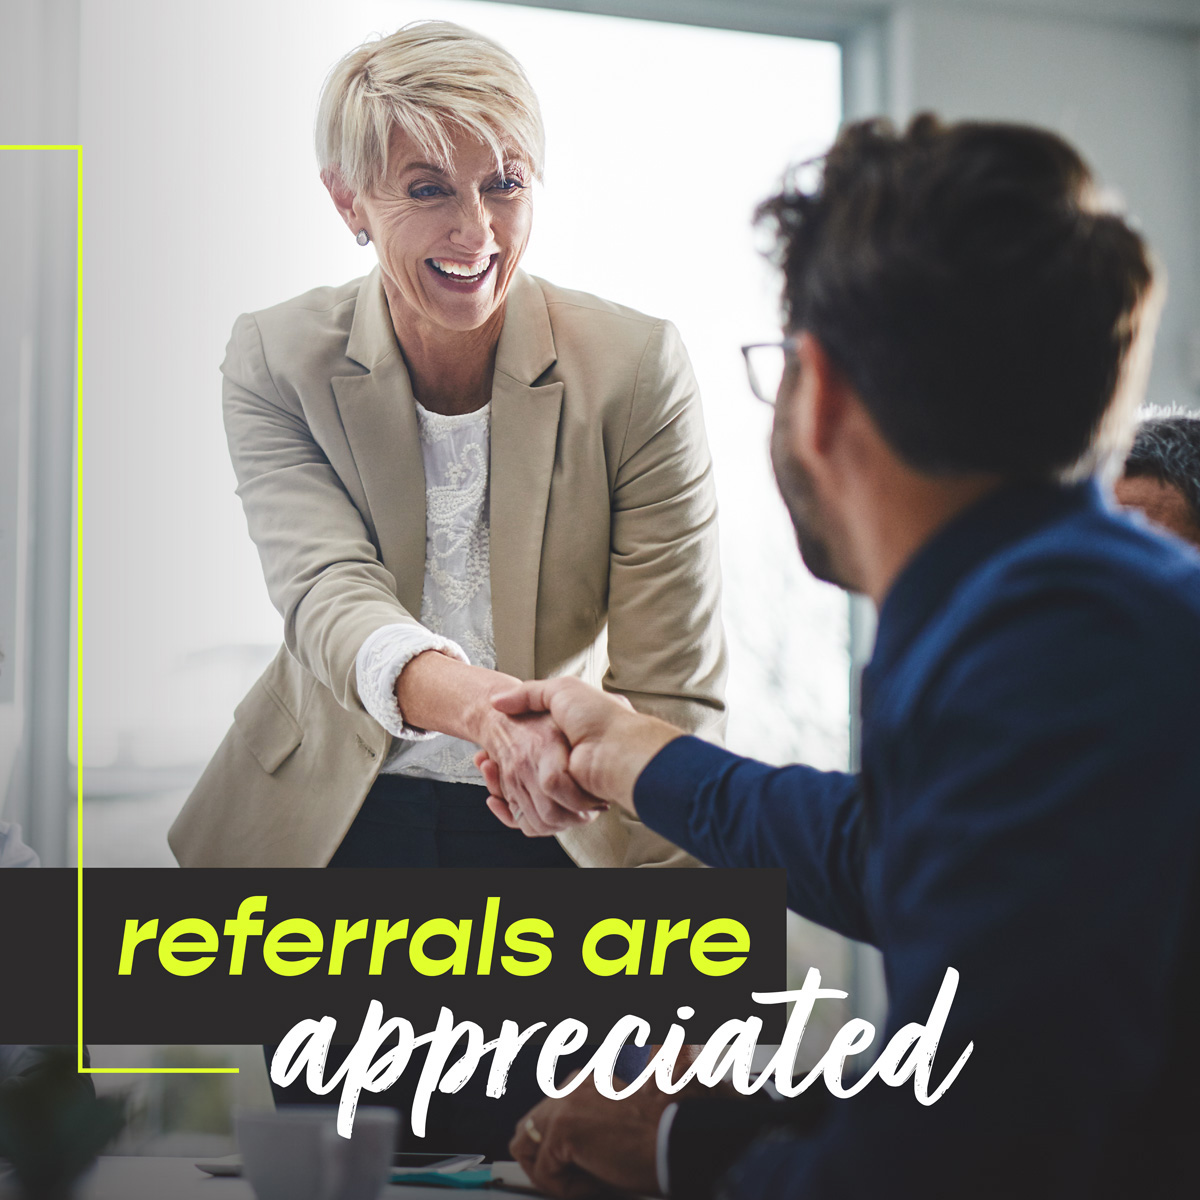 If you have any family or friends looking for a home, we'd appreciate the referral! We'll shop multiple lenders to find a tailored solution for their needs and we can get them to the closing table and into their dream home faster. #realestate #referrals #homesearch #dreamhome